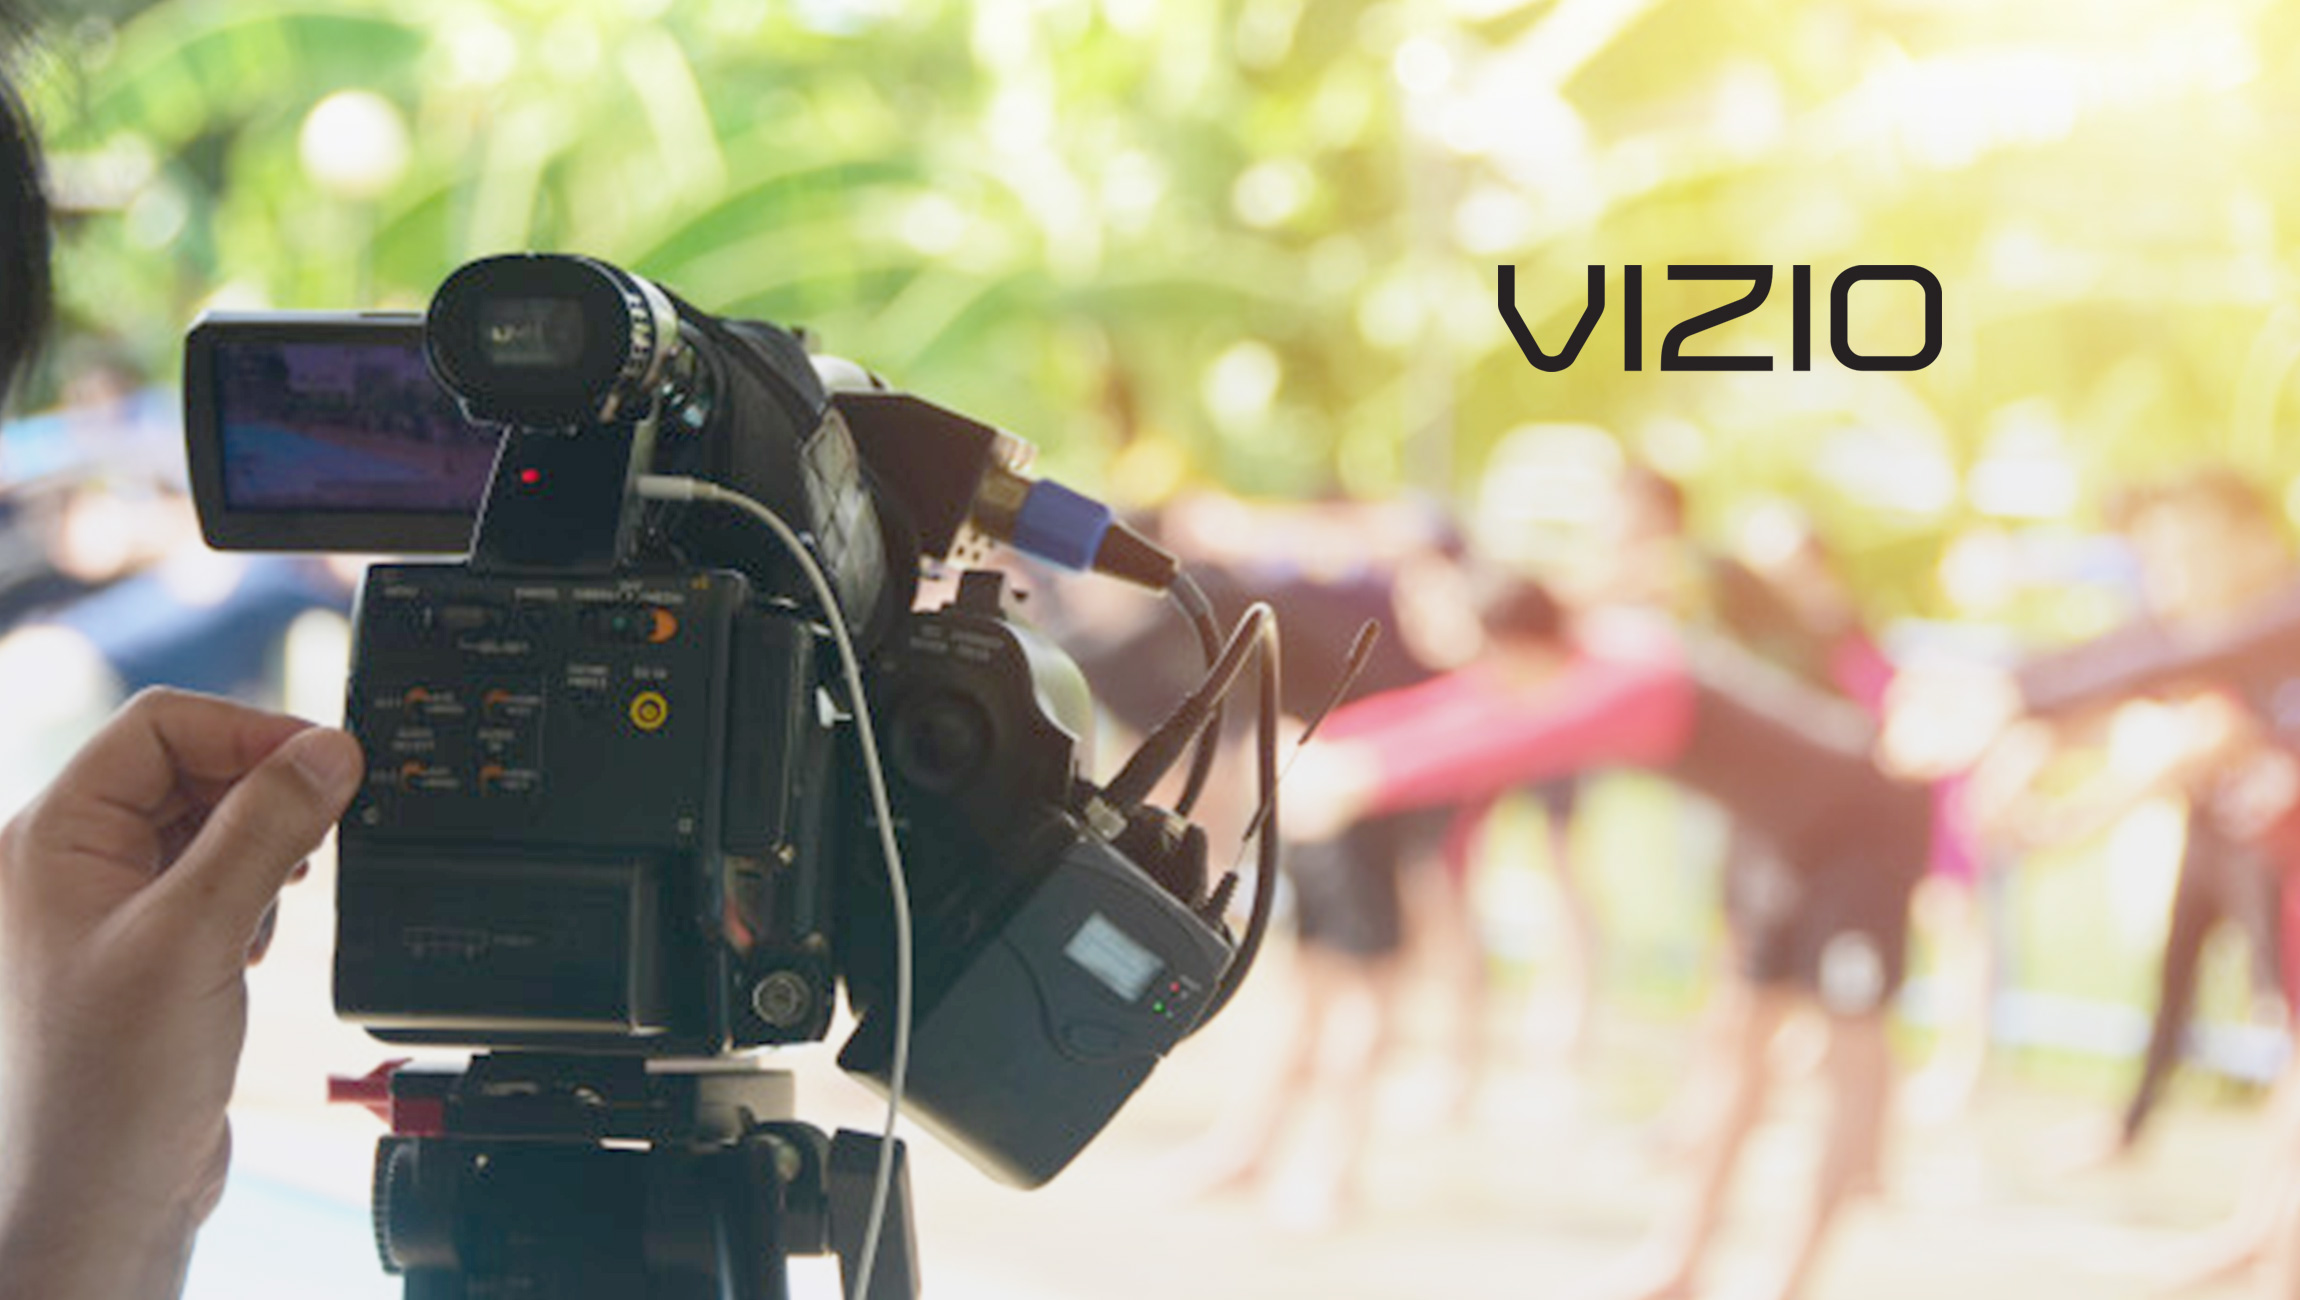 Leading Media Companies, Smart TV Maker VIZIO Come Together for "Project OAR" - a Consortium Dedicated to Establishing an Addressable Advertising Standard